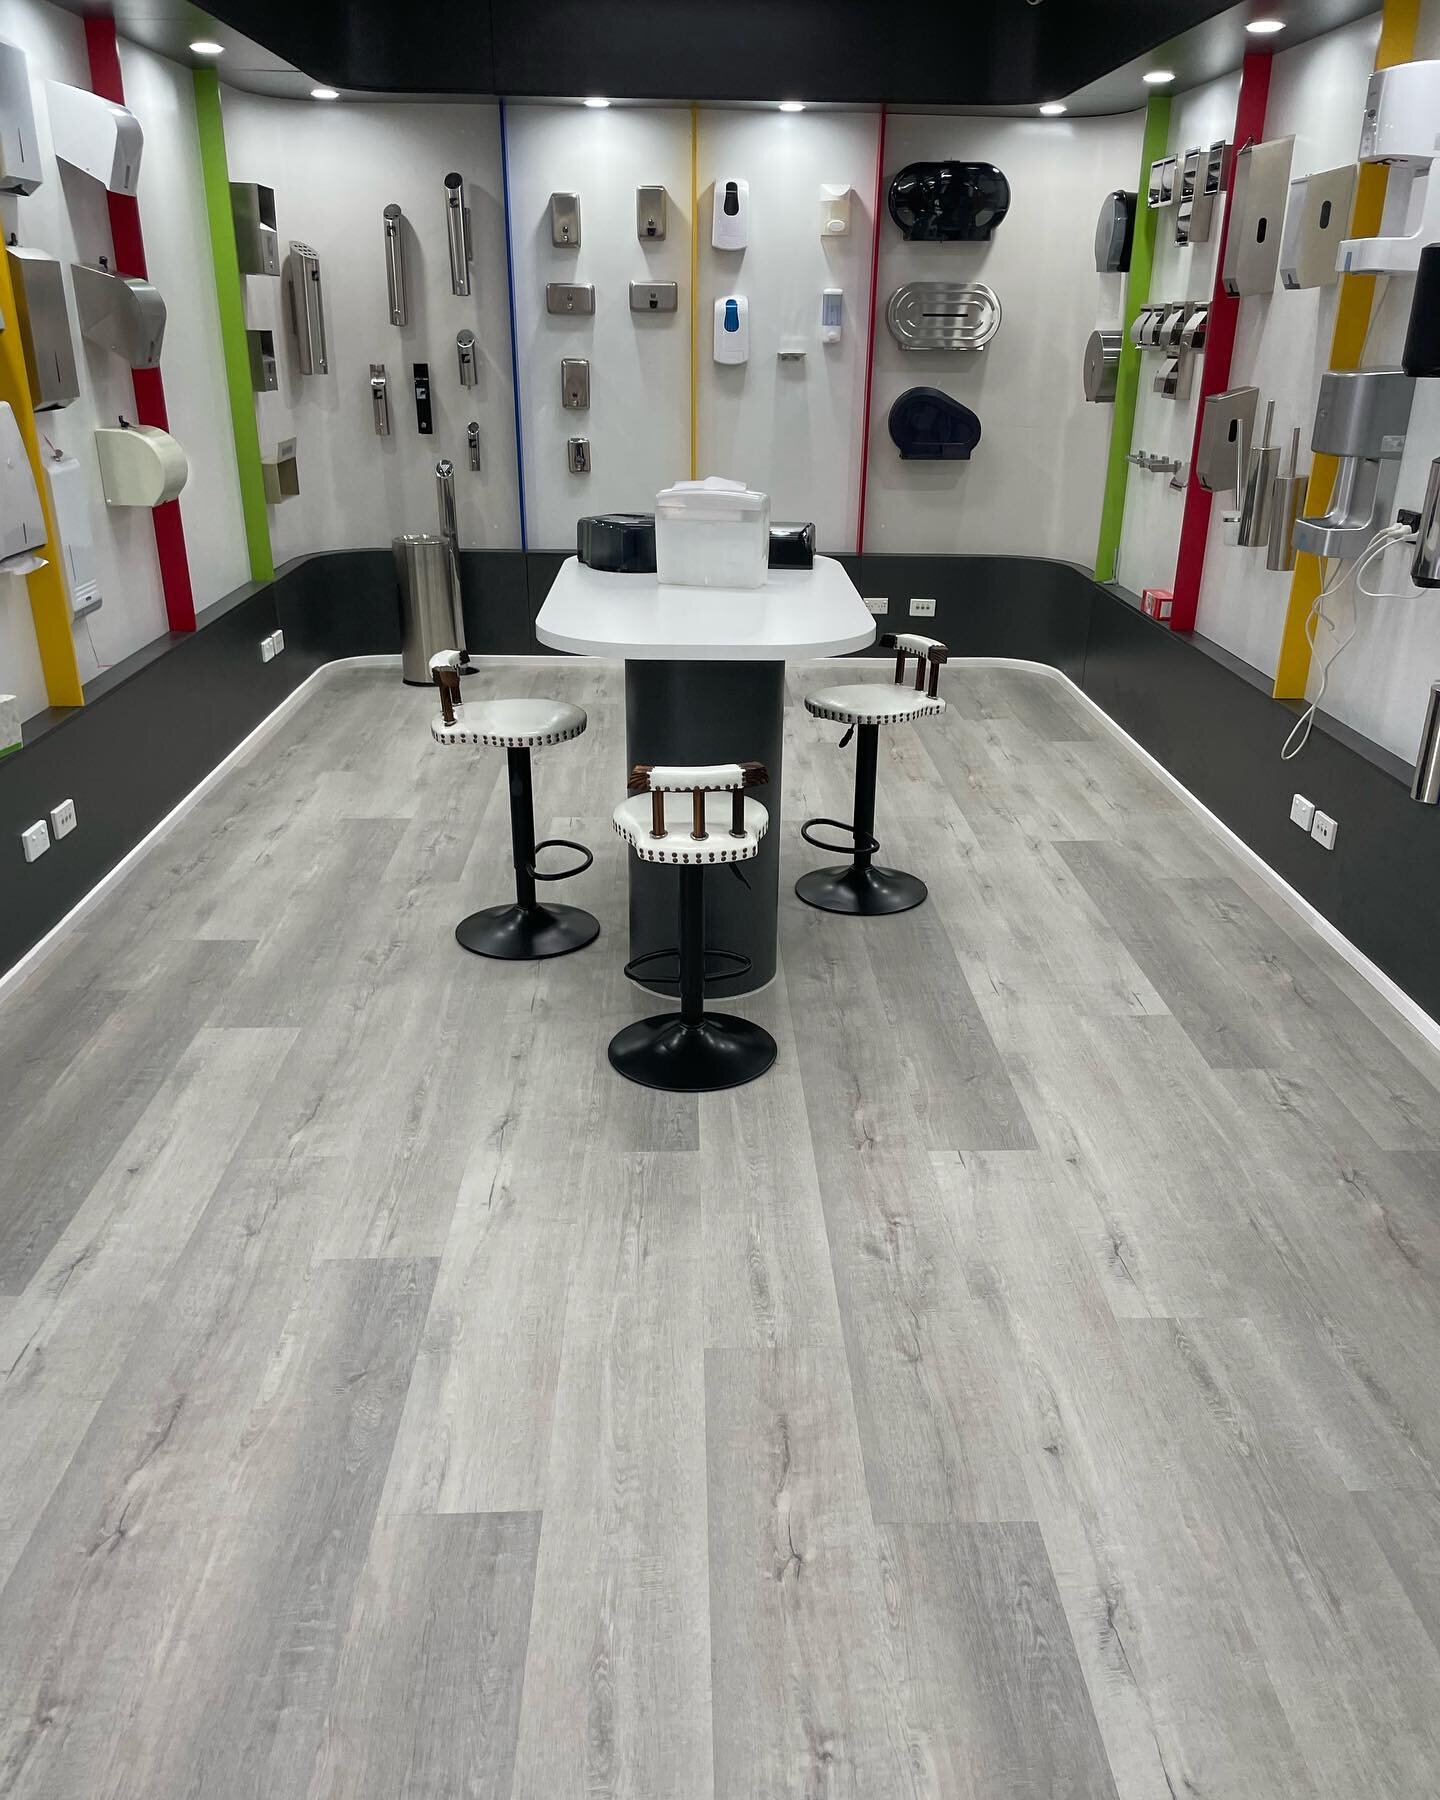 Was a pleasure handling this project for our good friends at Insuraplex. After @ozwashroom had severe water damage to their current floor coverings we were called in to remove, level and install this beautiful hybrid vinyl and complete it with black 